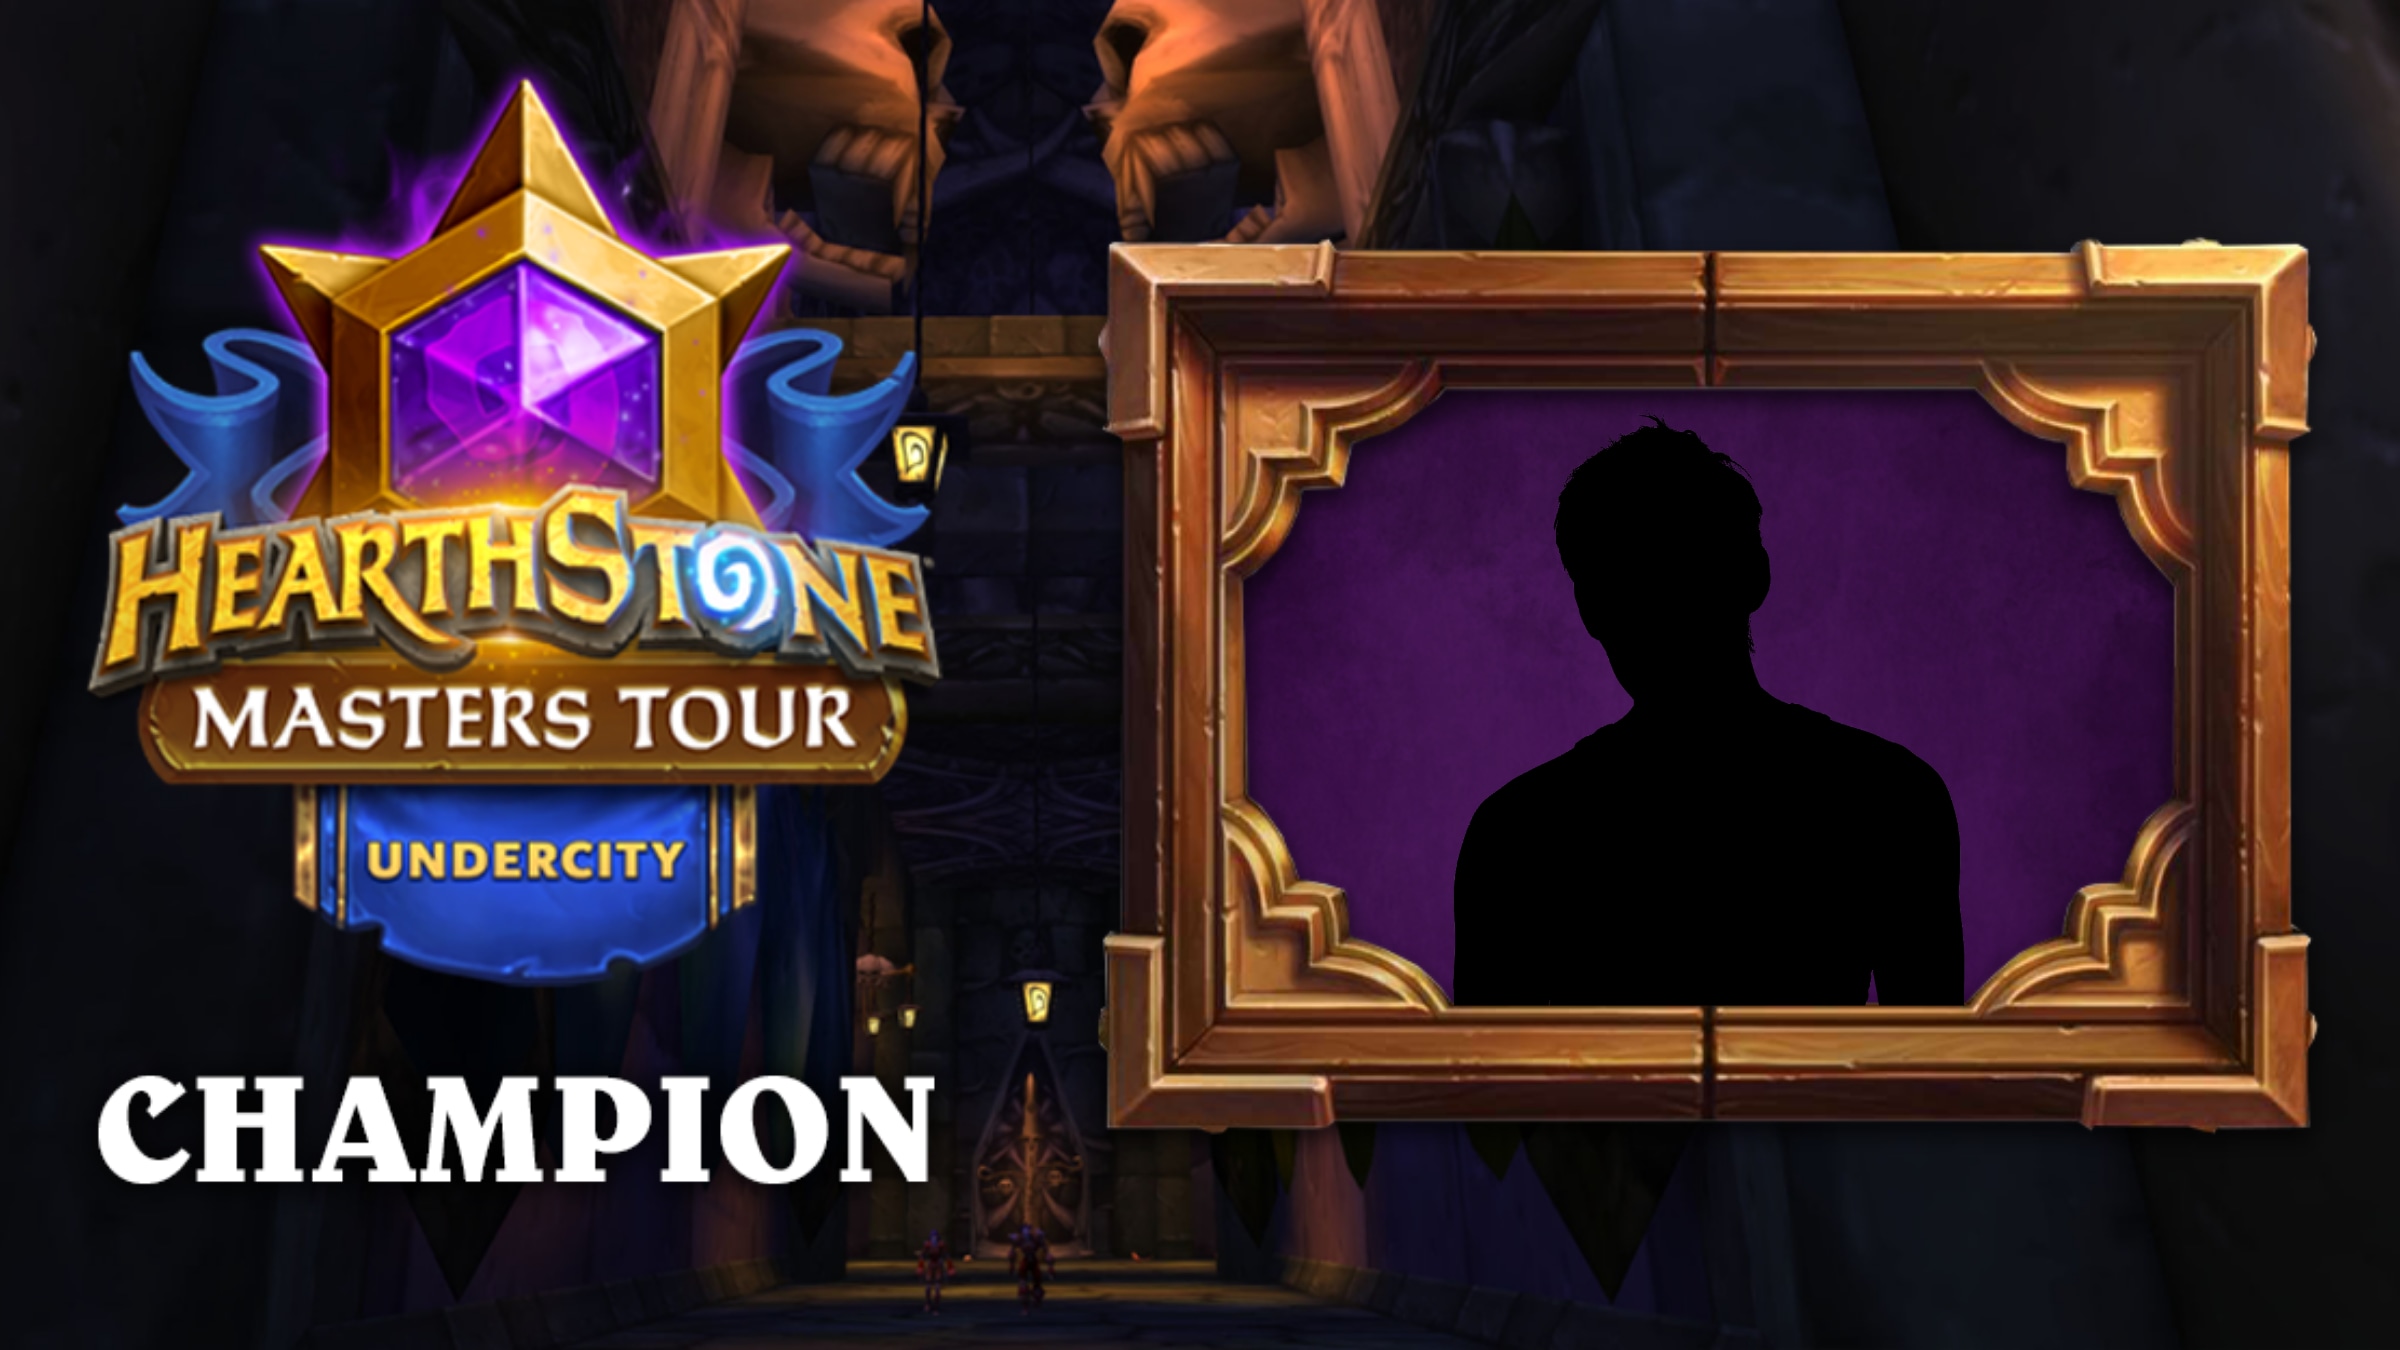 A Champion is Declared at Hearthstone Masters Tour Undercity!